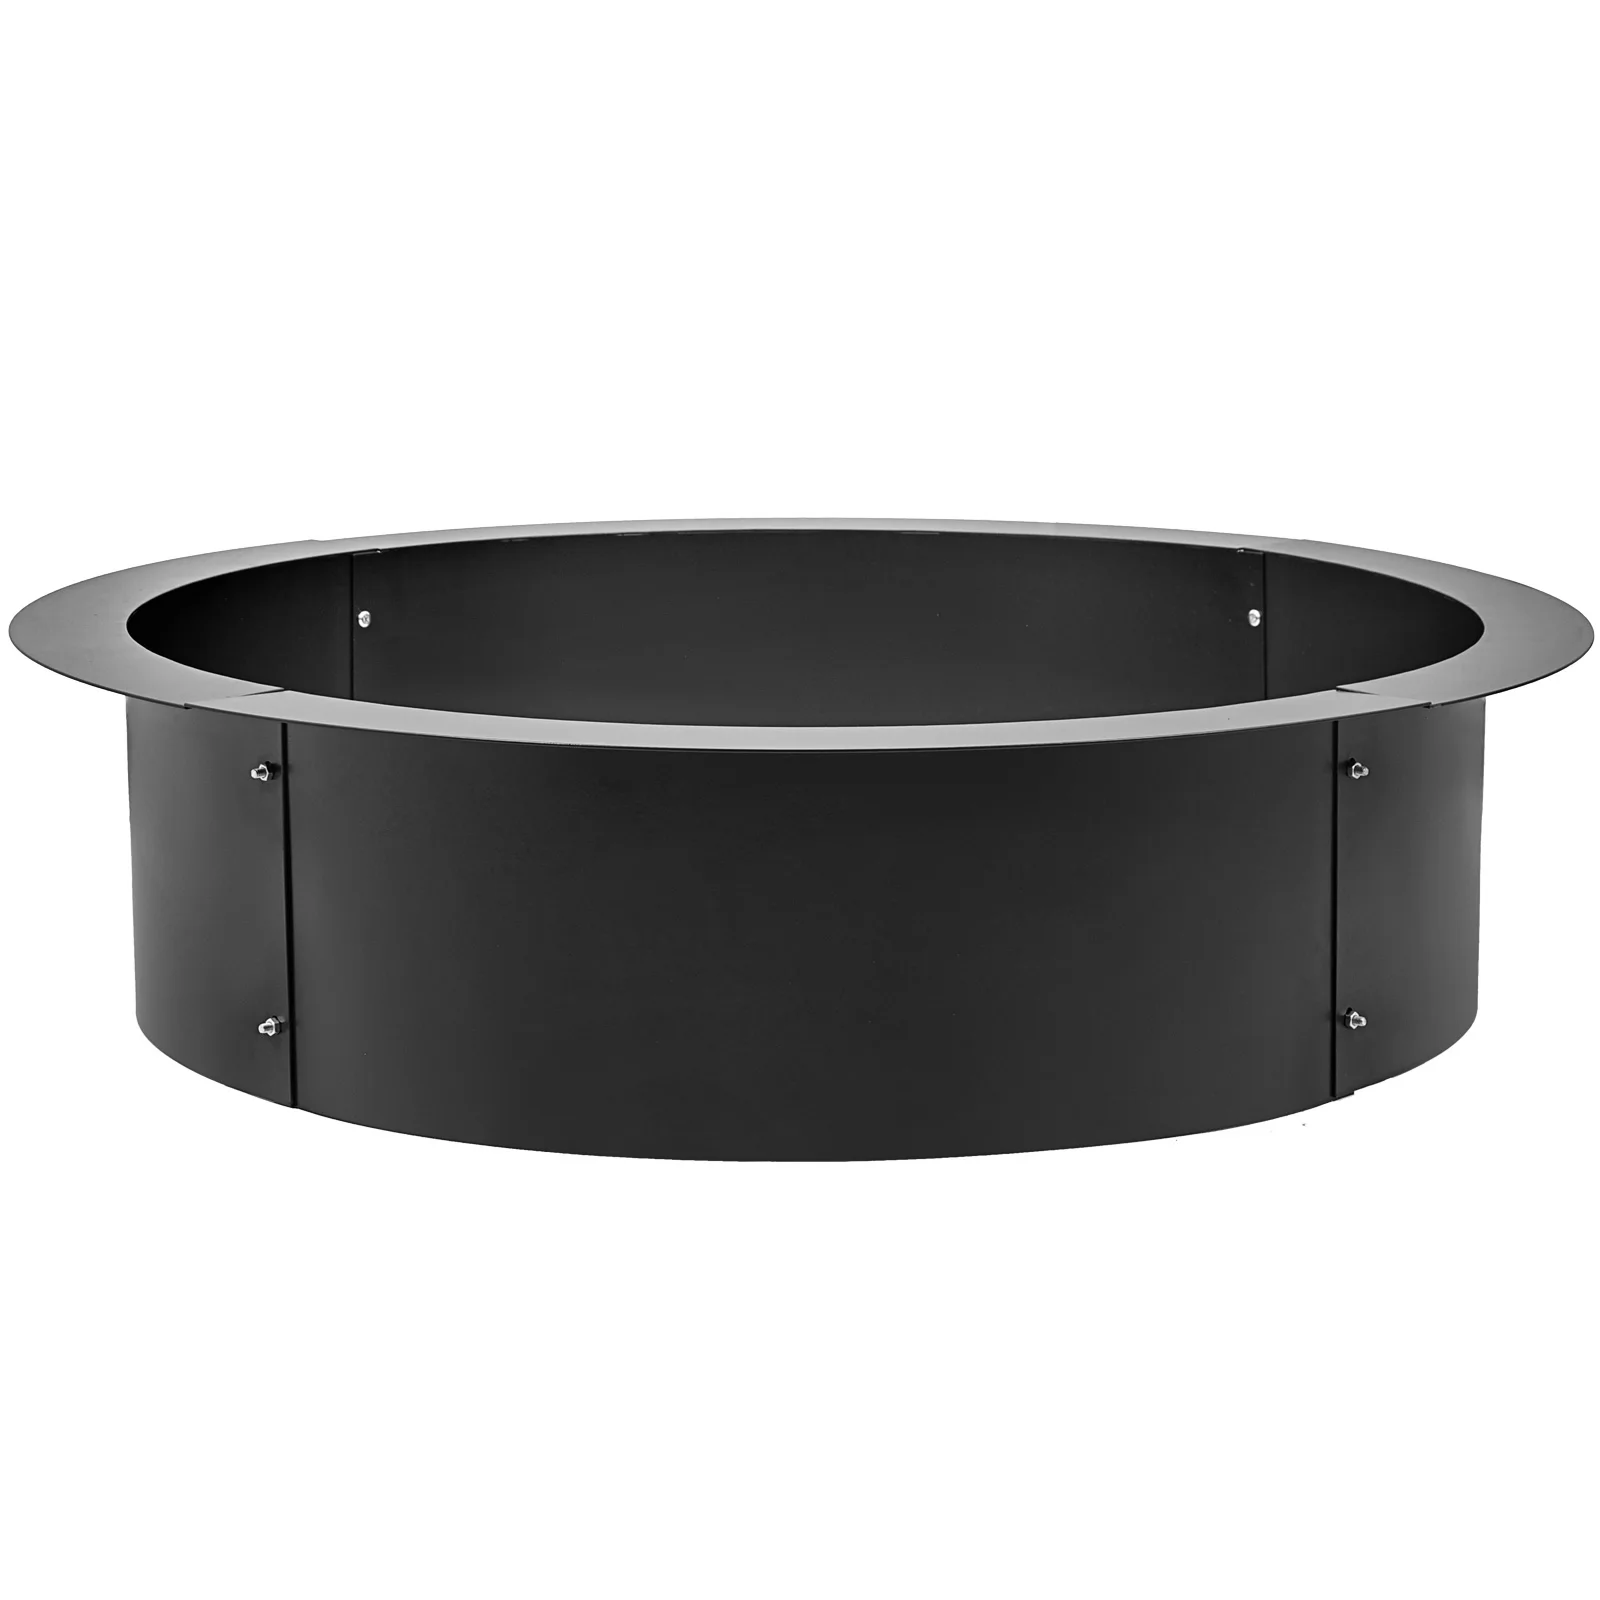 

36 Inch Outsidex30 Inch Inside Heavy Duty Fire Pit Ring/Liner DIY Greate atmosphere Q235 Steel